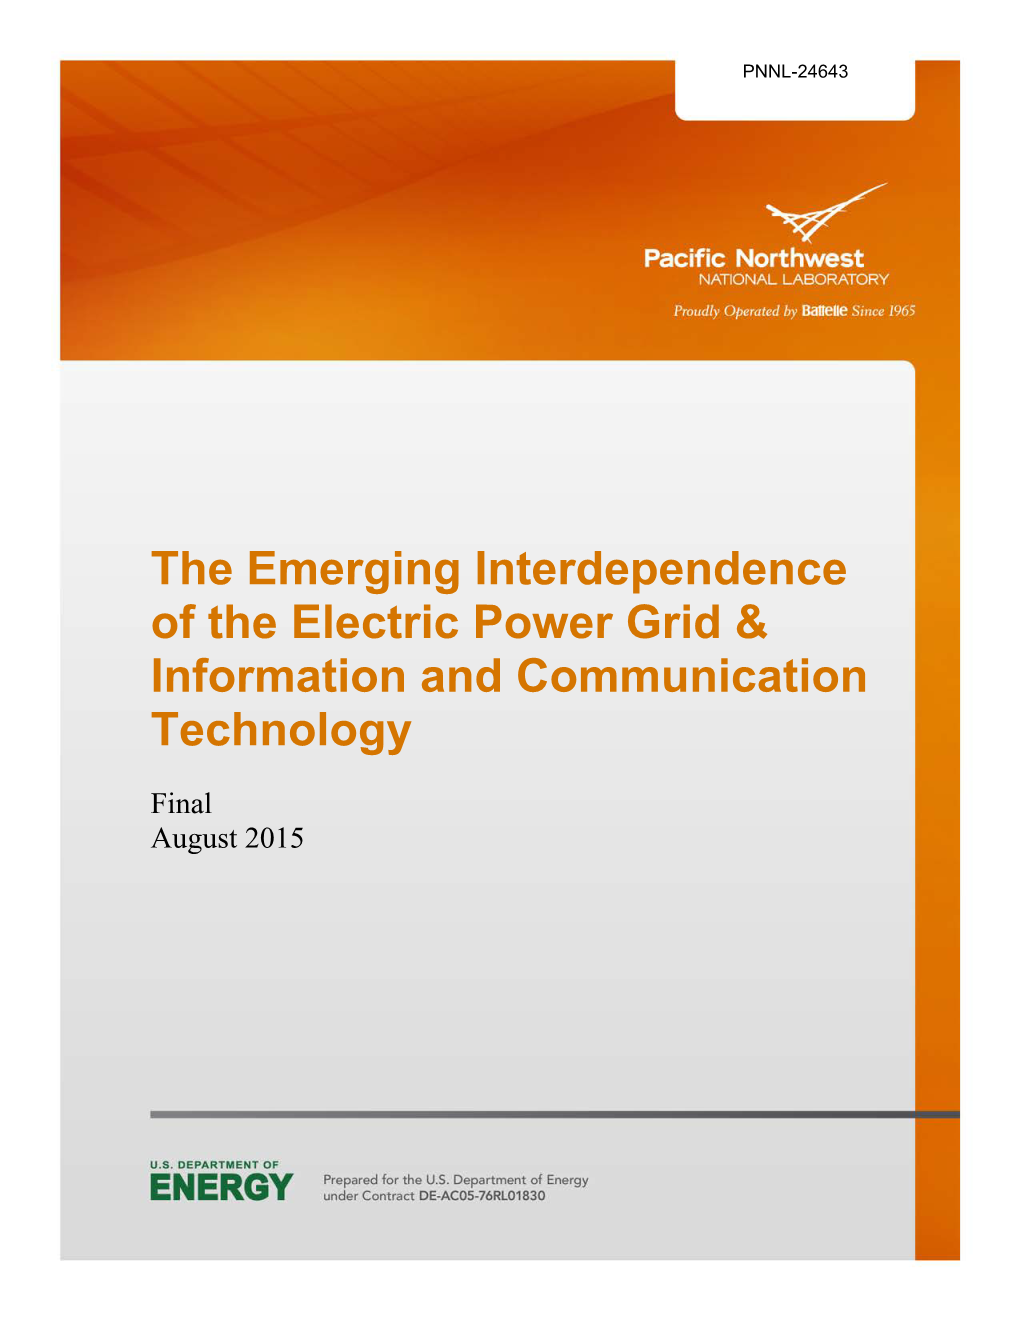 The Emerging Interdependence of the Electric Power Grid & Information